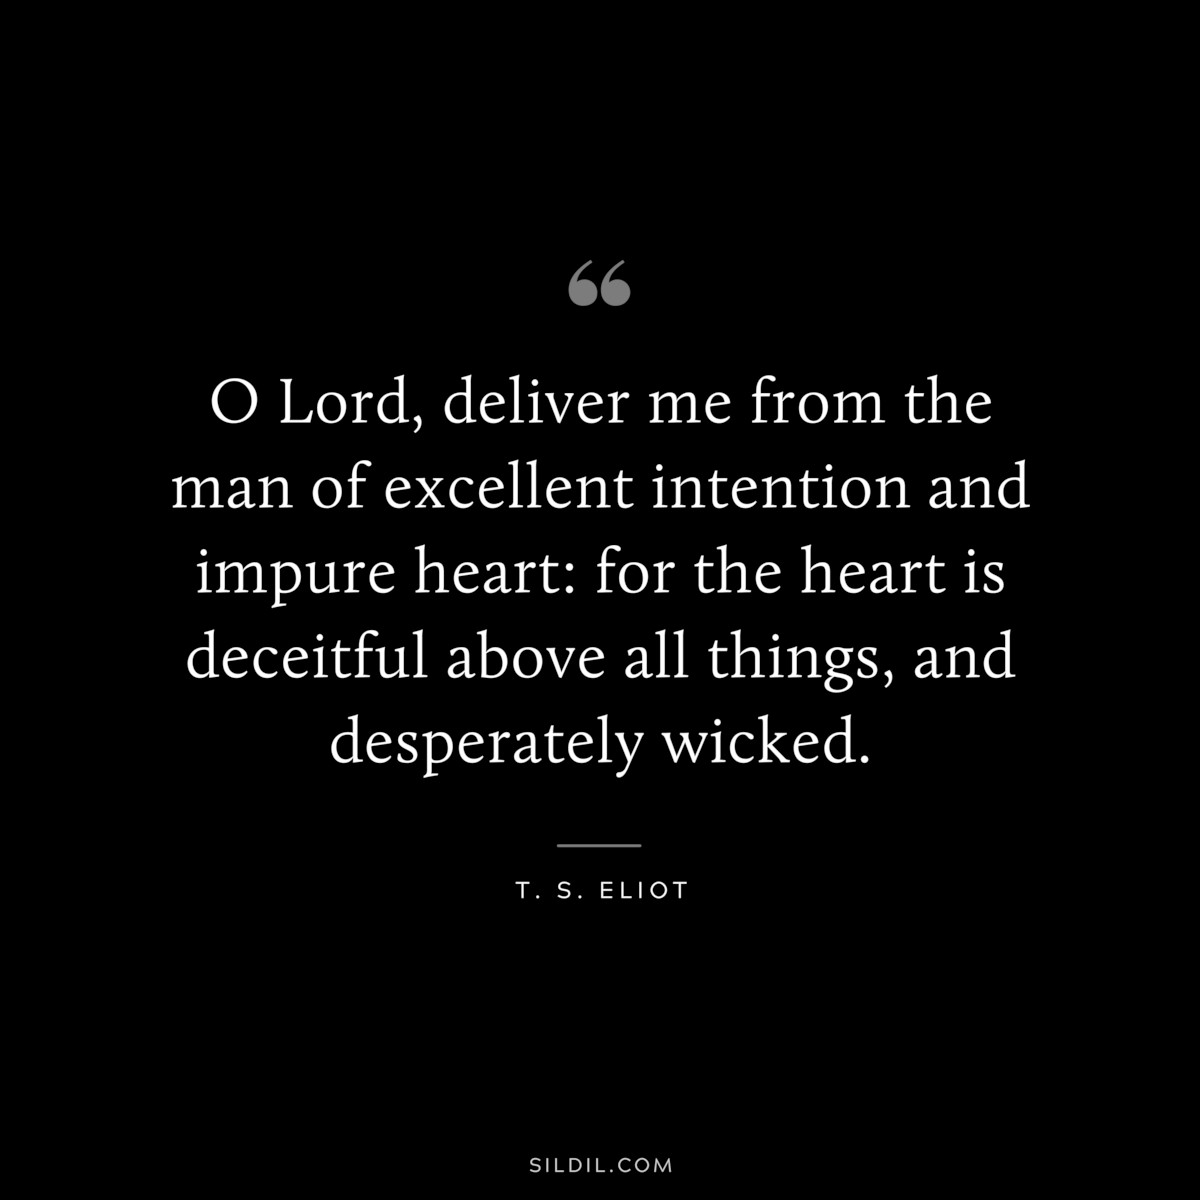 O Lord, deliver me from the man of excellent intention and impure heart: for the heart is deceitful above all things, and desperately wicked. ― T. S. Eliot